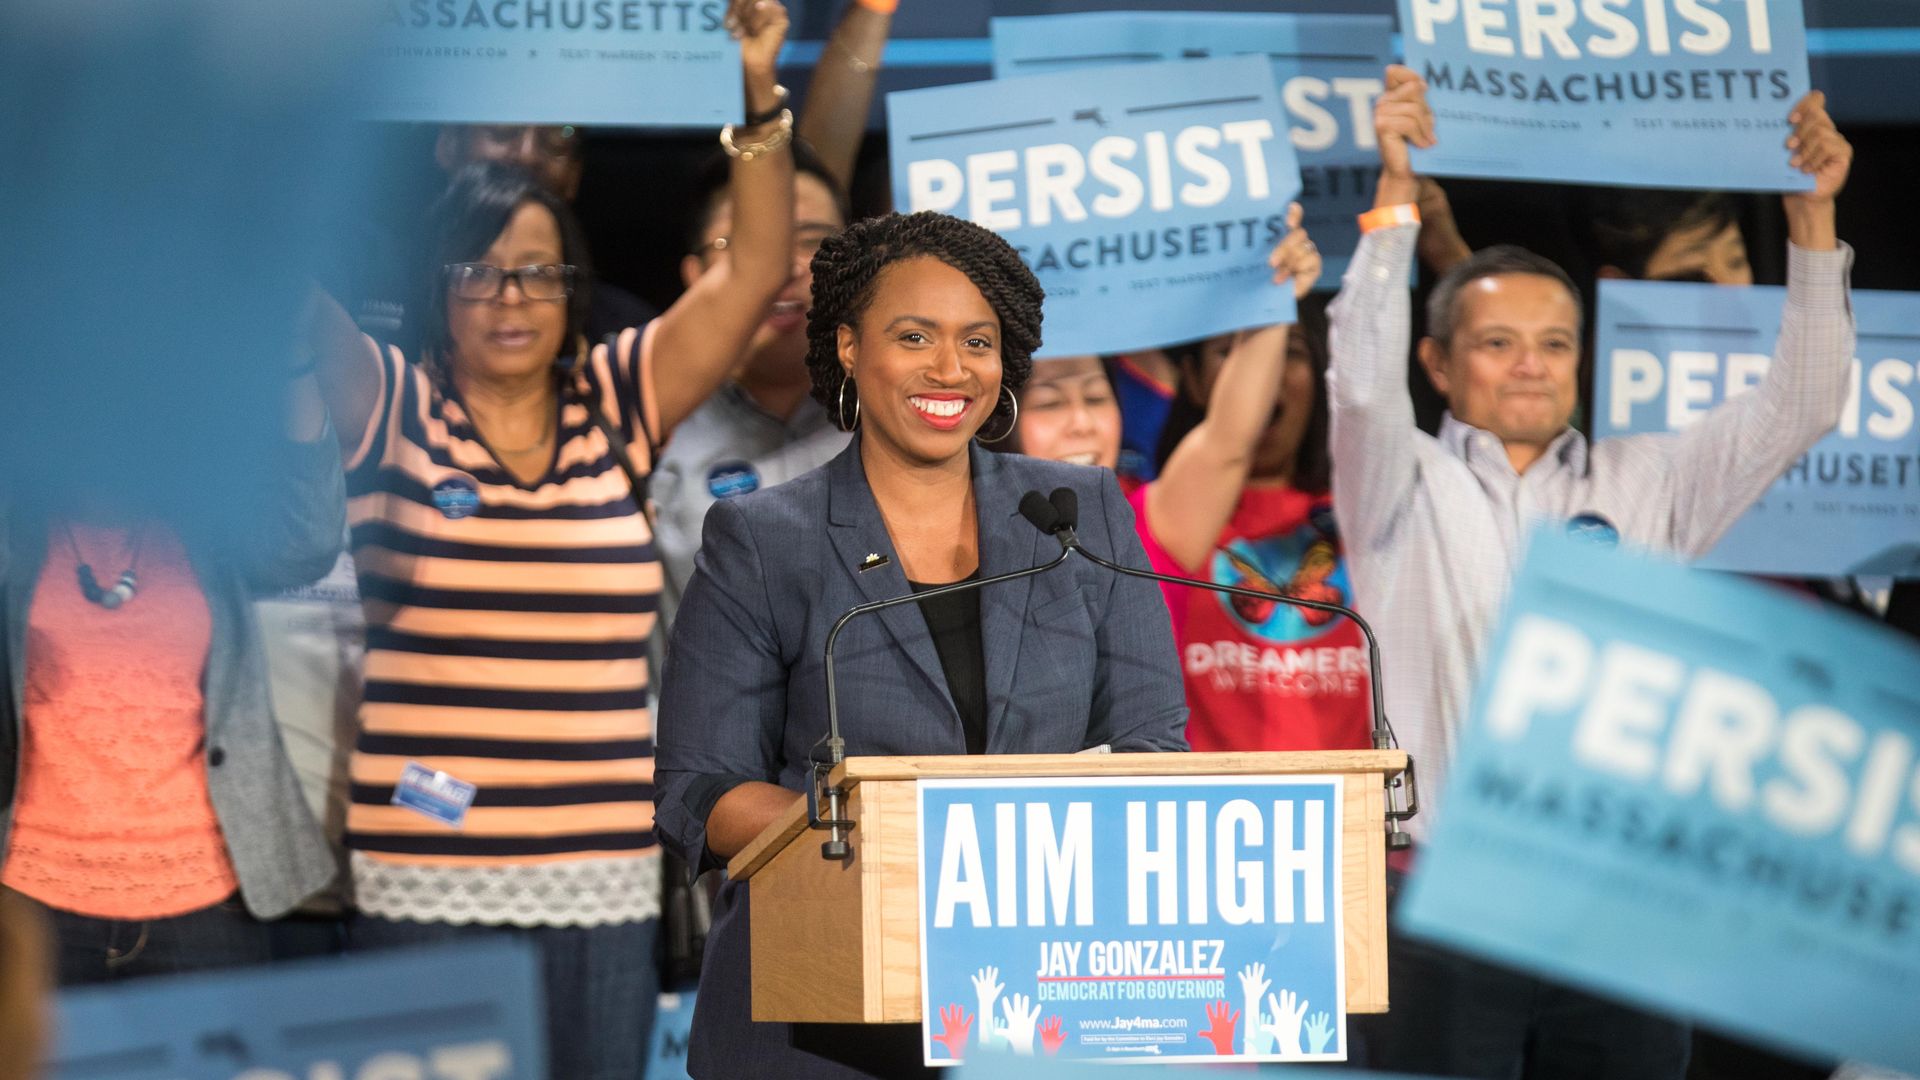 Ayanna Pressley at a campaign rally, surrounded by "Persist" signs.